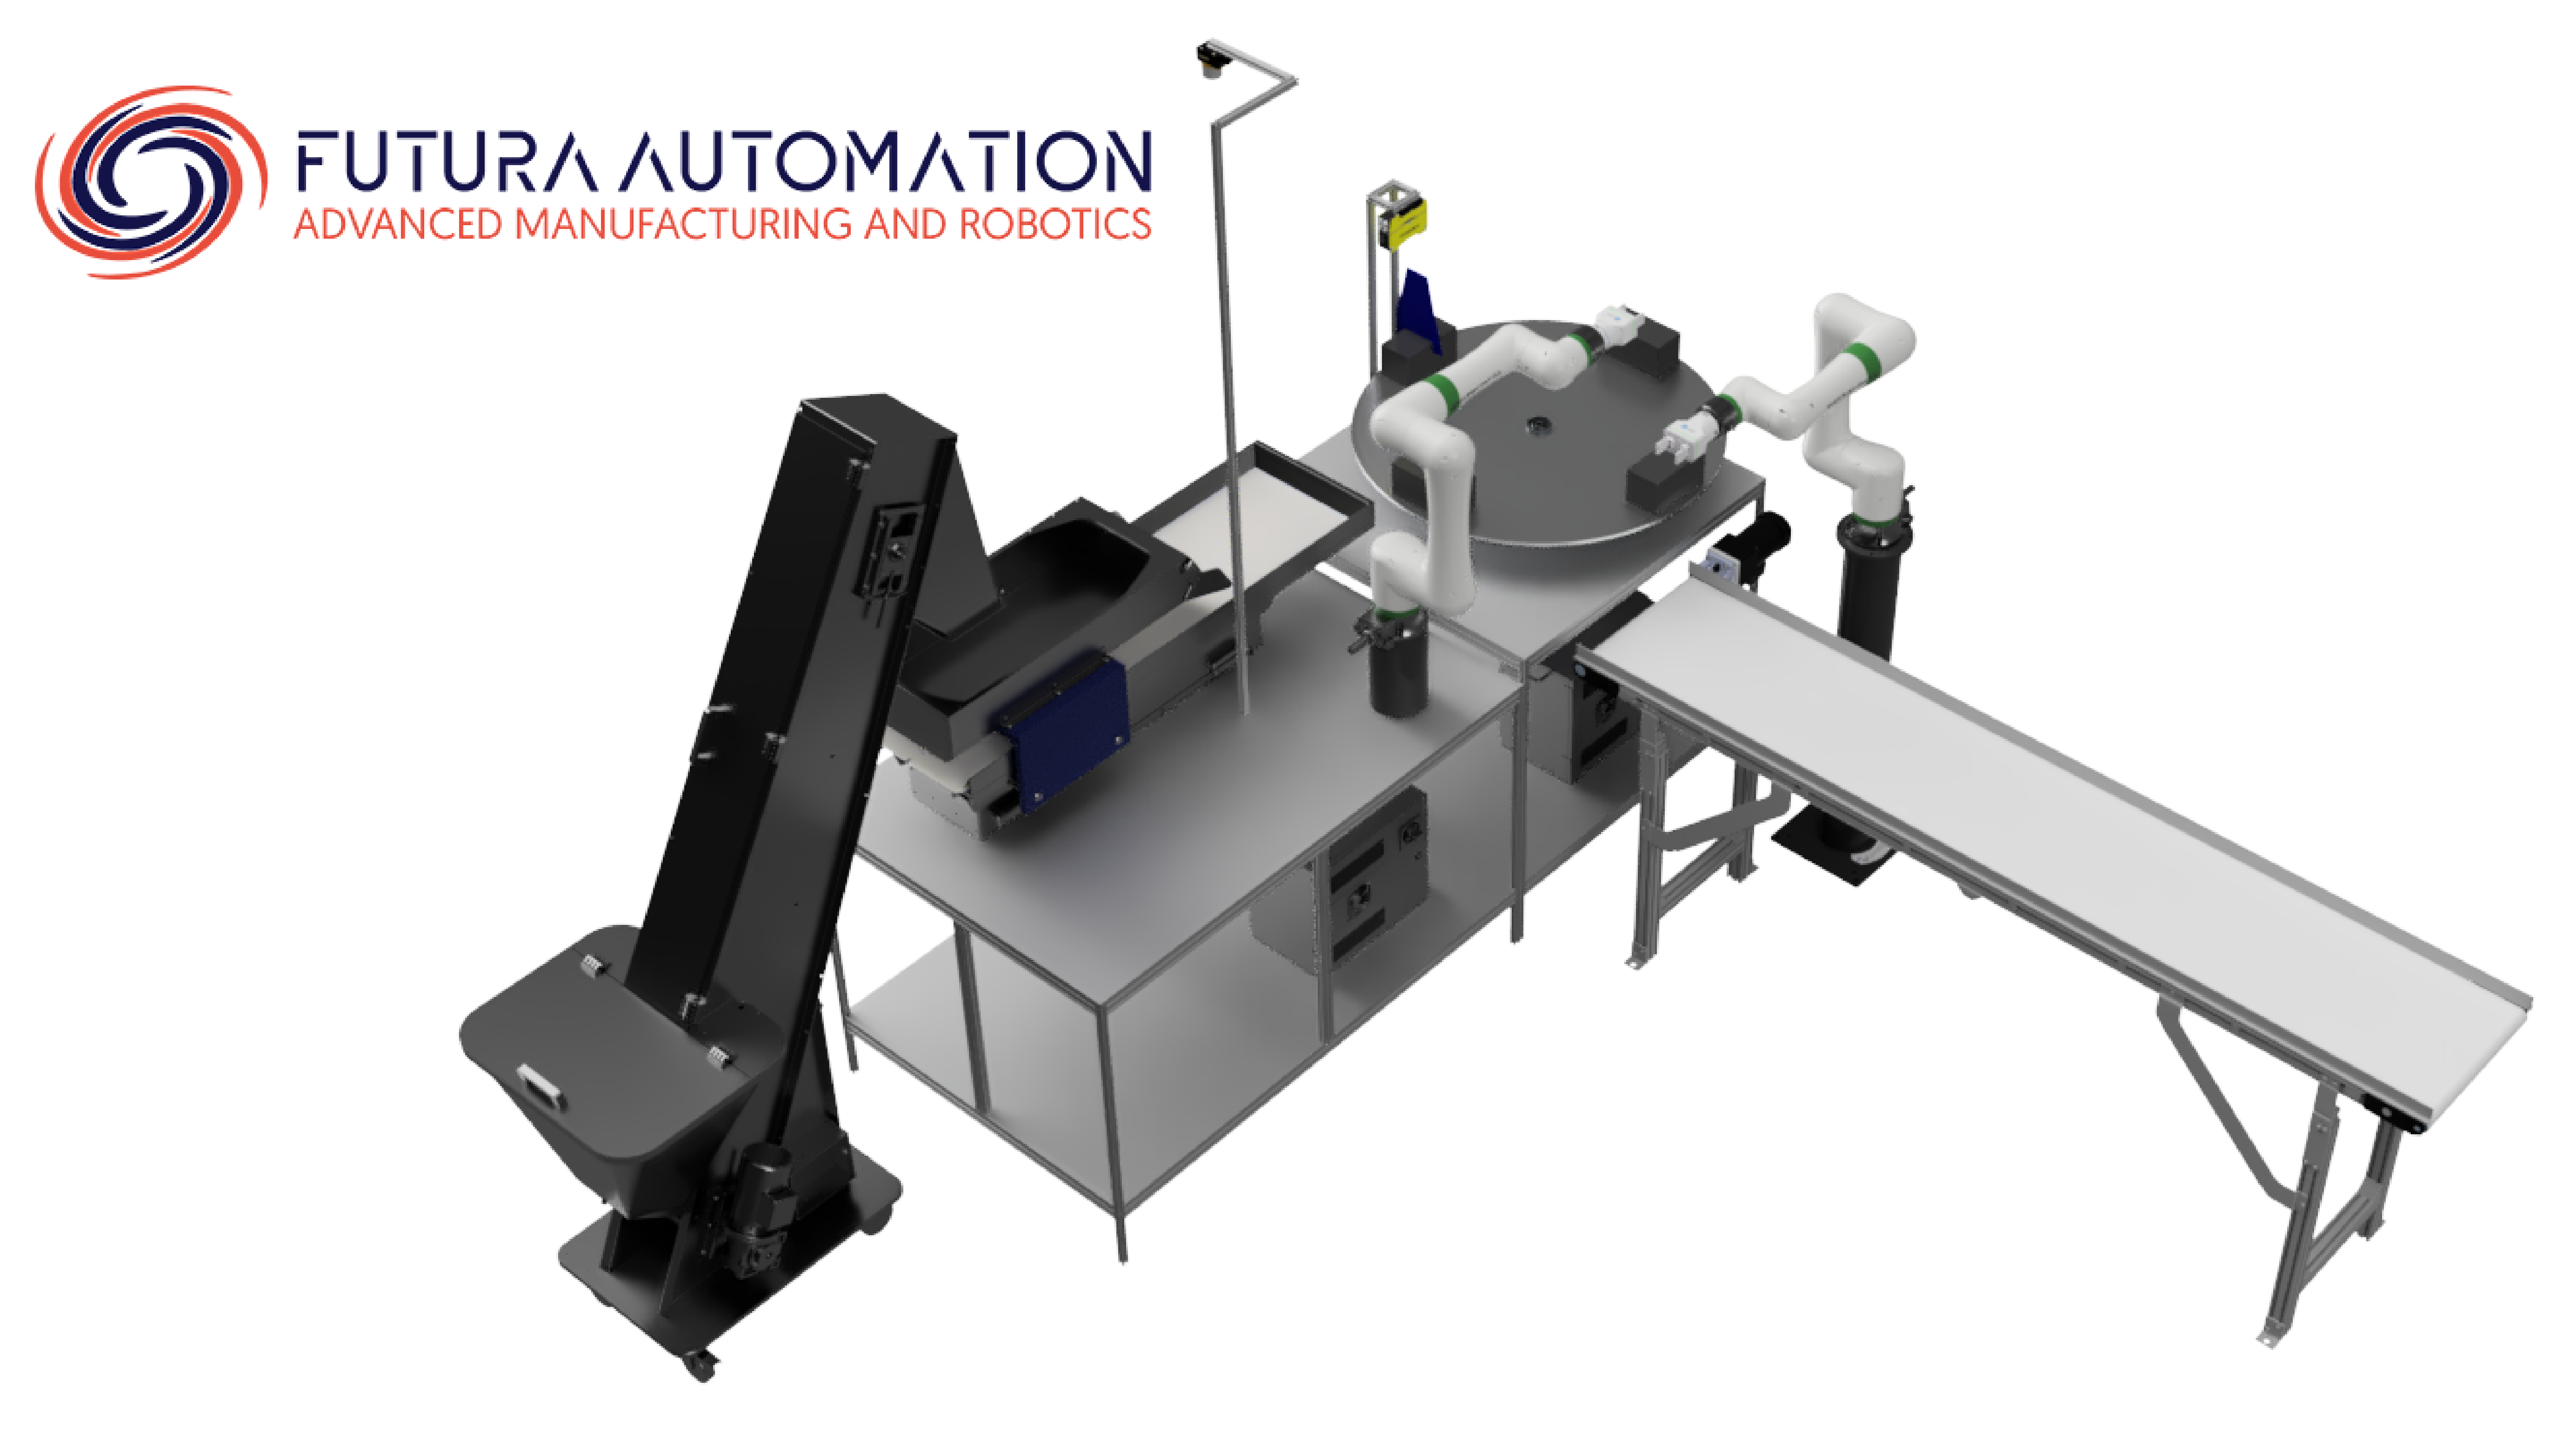 Futura Automation - Assembly Systems graphic